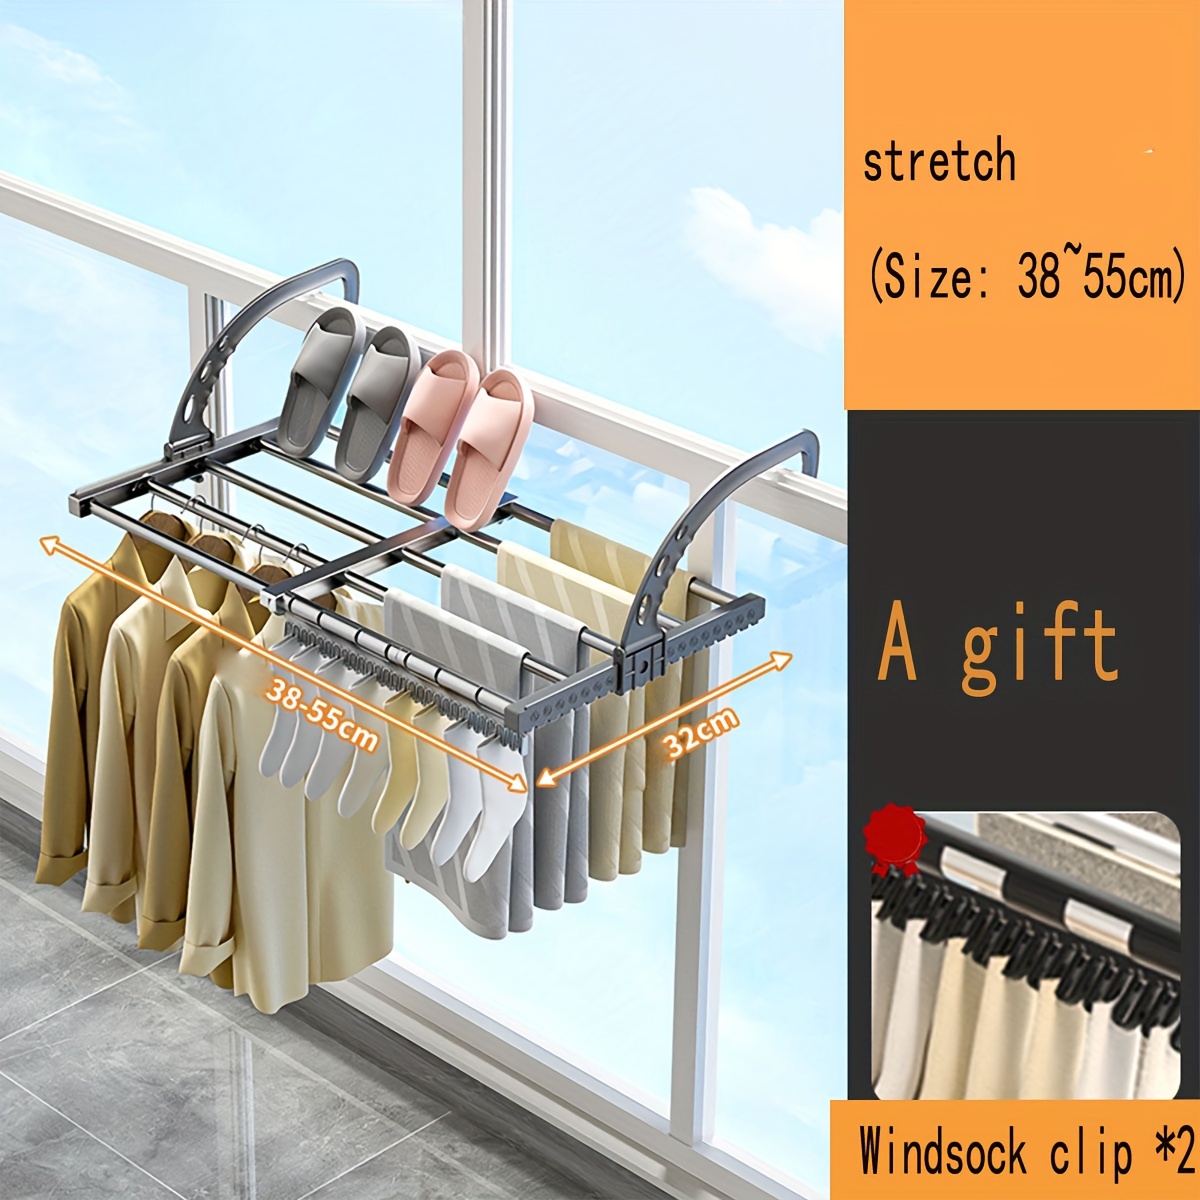 FKUO Metal Folding Clothes Drying Rack, Wall Mounted Clothes Hanger Rack,  Retractable Collapsible Laundry Drying Rack, Towel Rack Space Saver (Black)